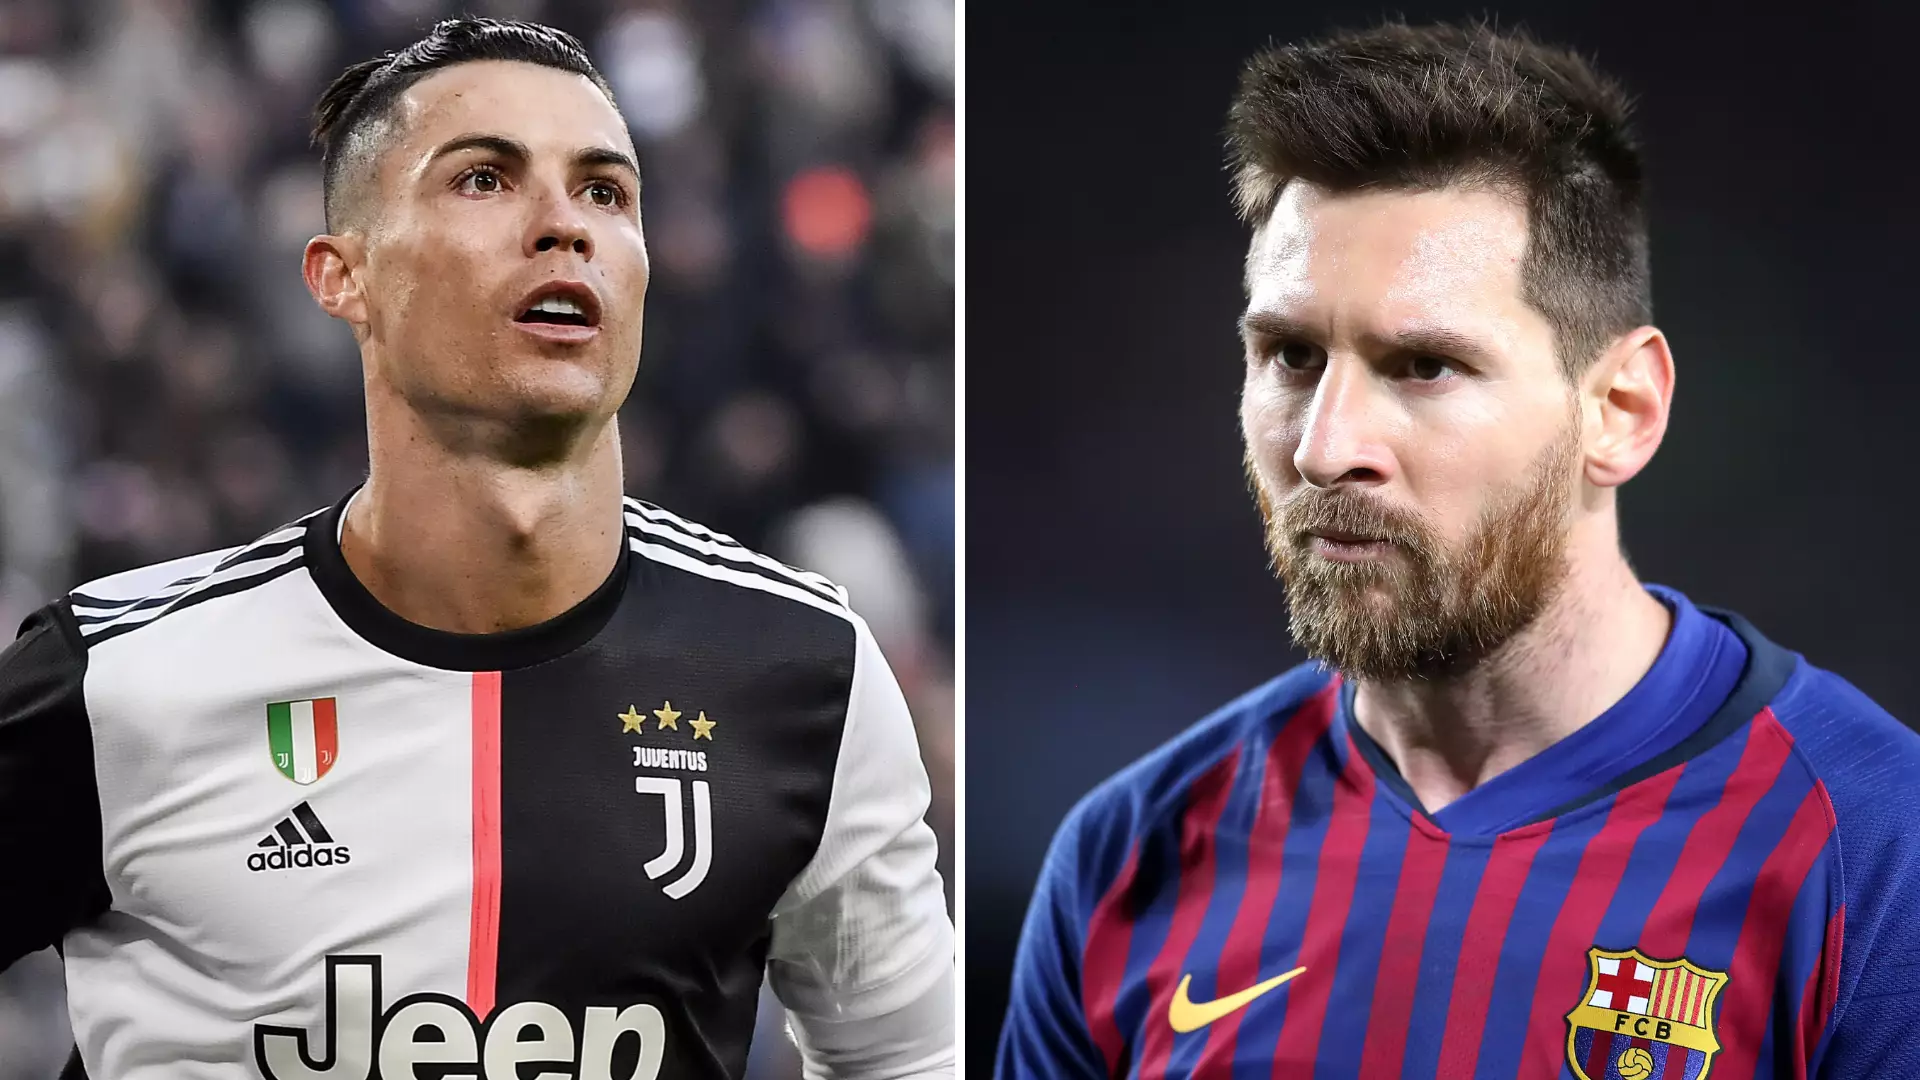 Lionel Messi And Cristiano Ronaldo Thread Attempts To Settle The GOAT Debate Once And For All